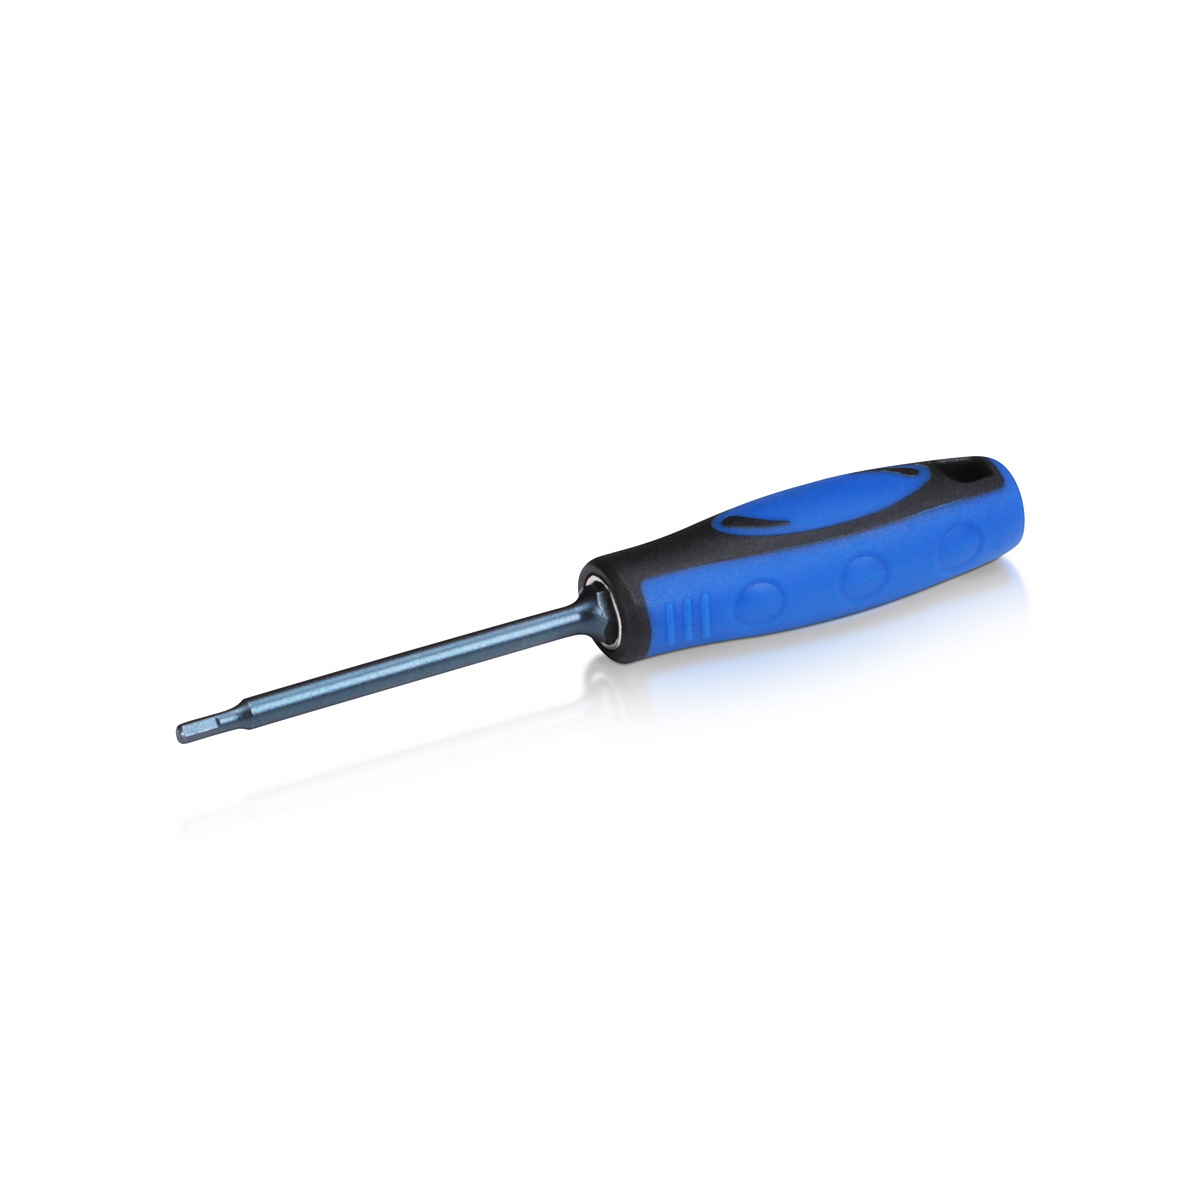 2.5 mm Stubby Driver for Standoffs and Cable Systems and signage